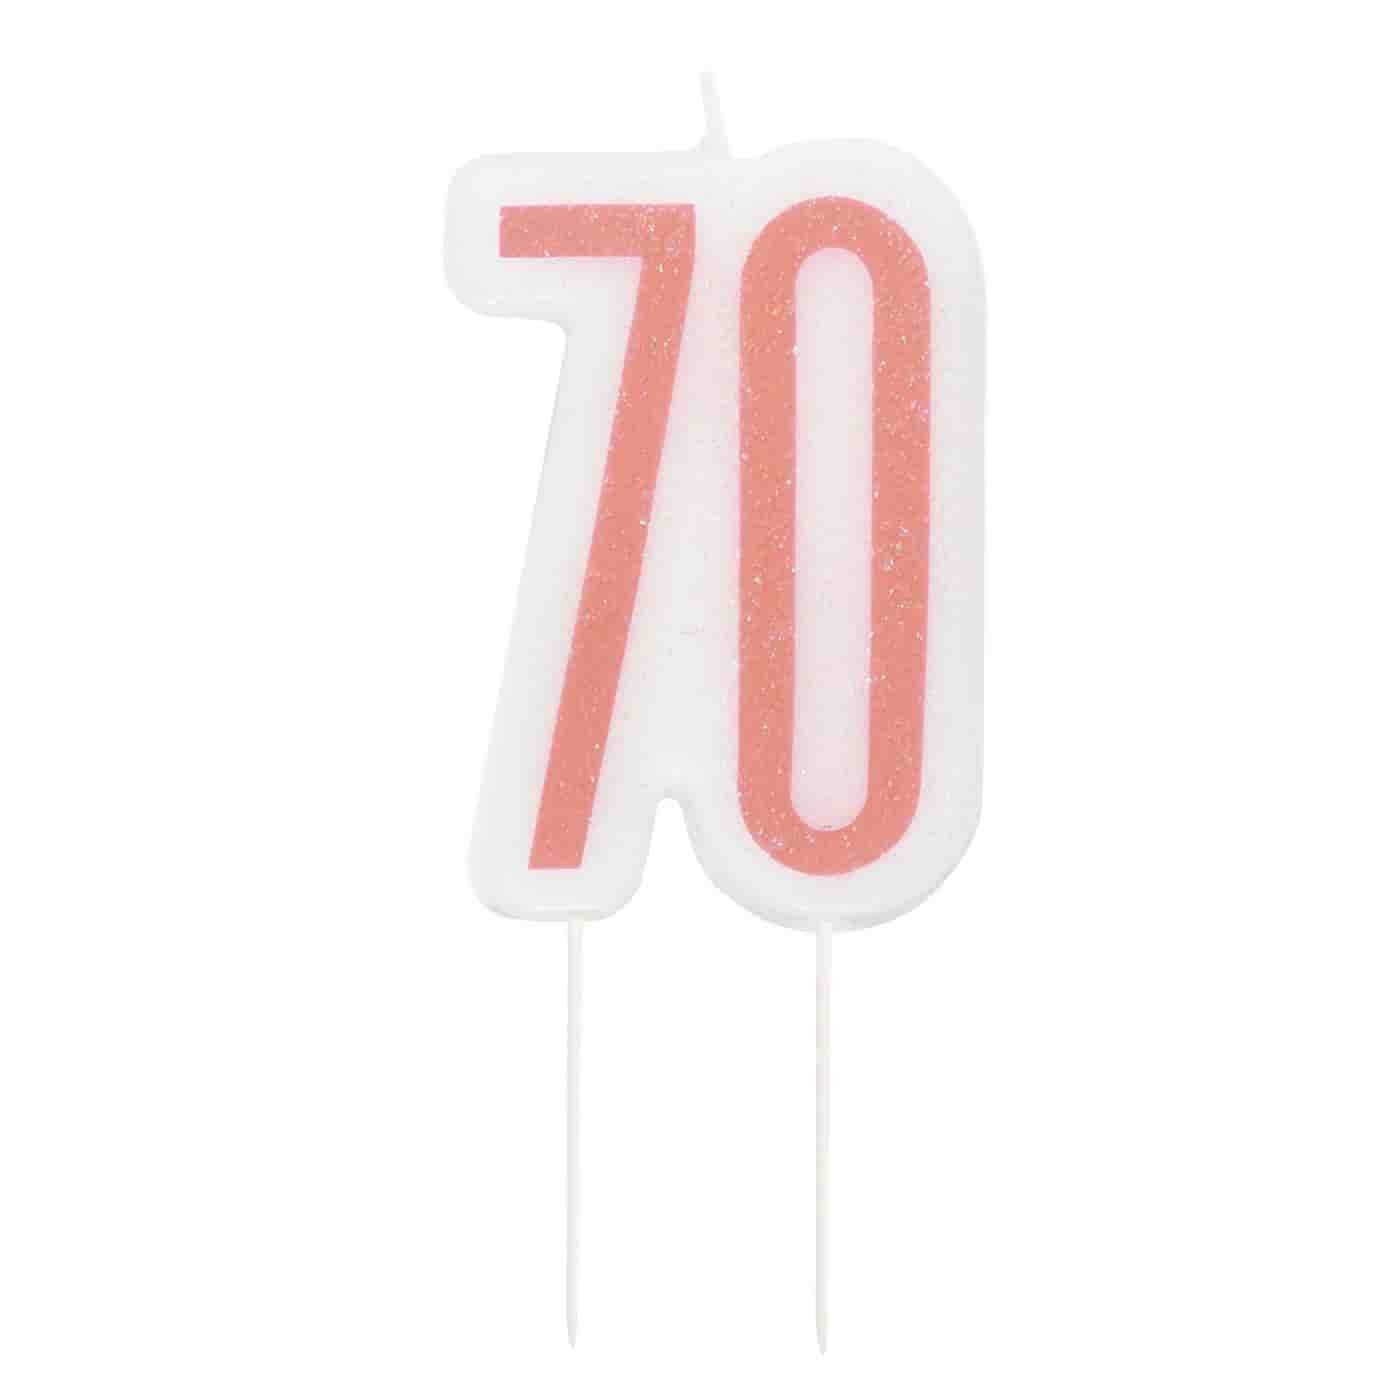 70th Birthday Cake Candle